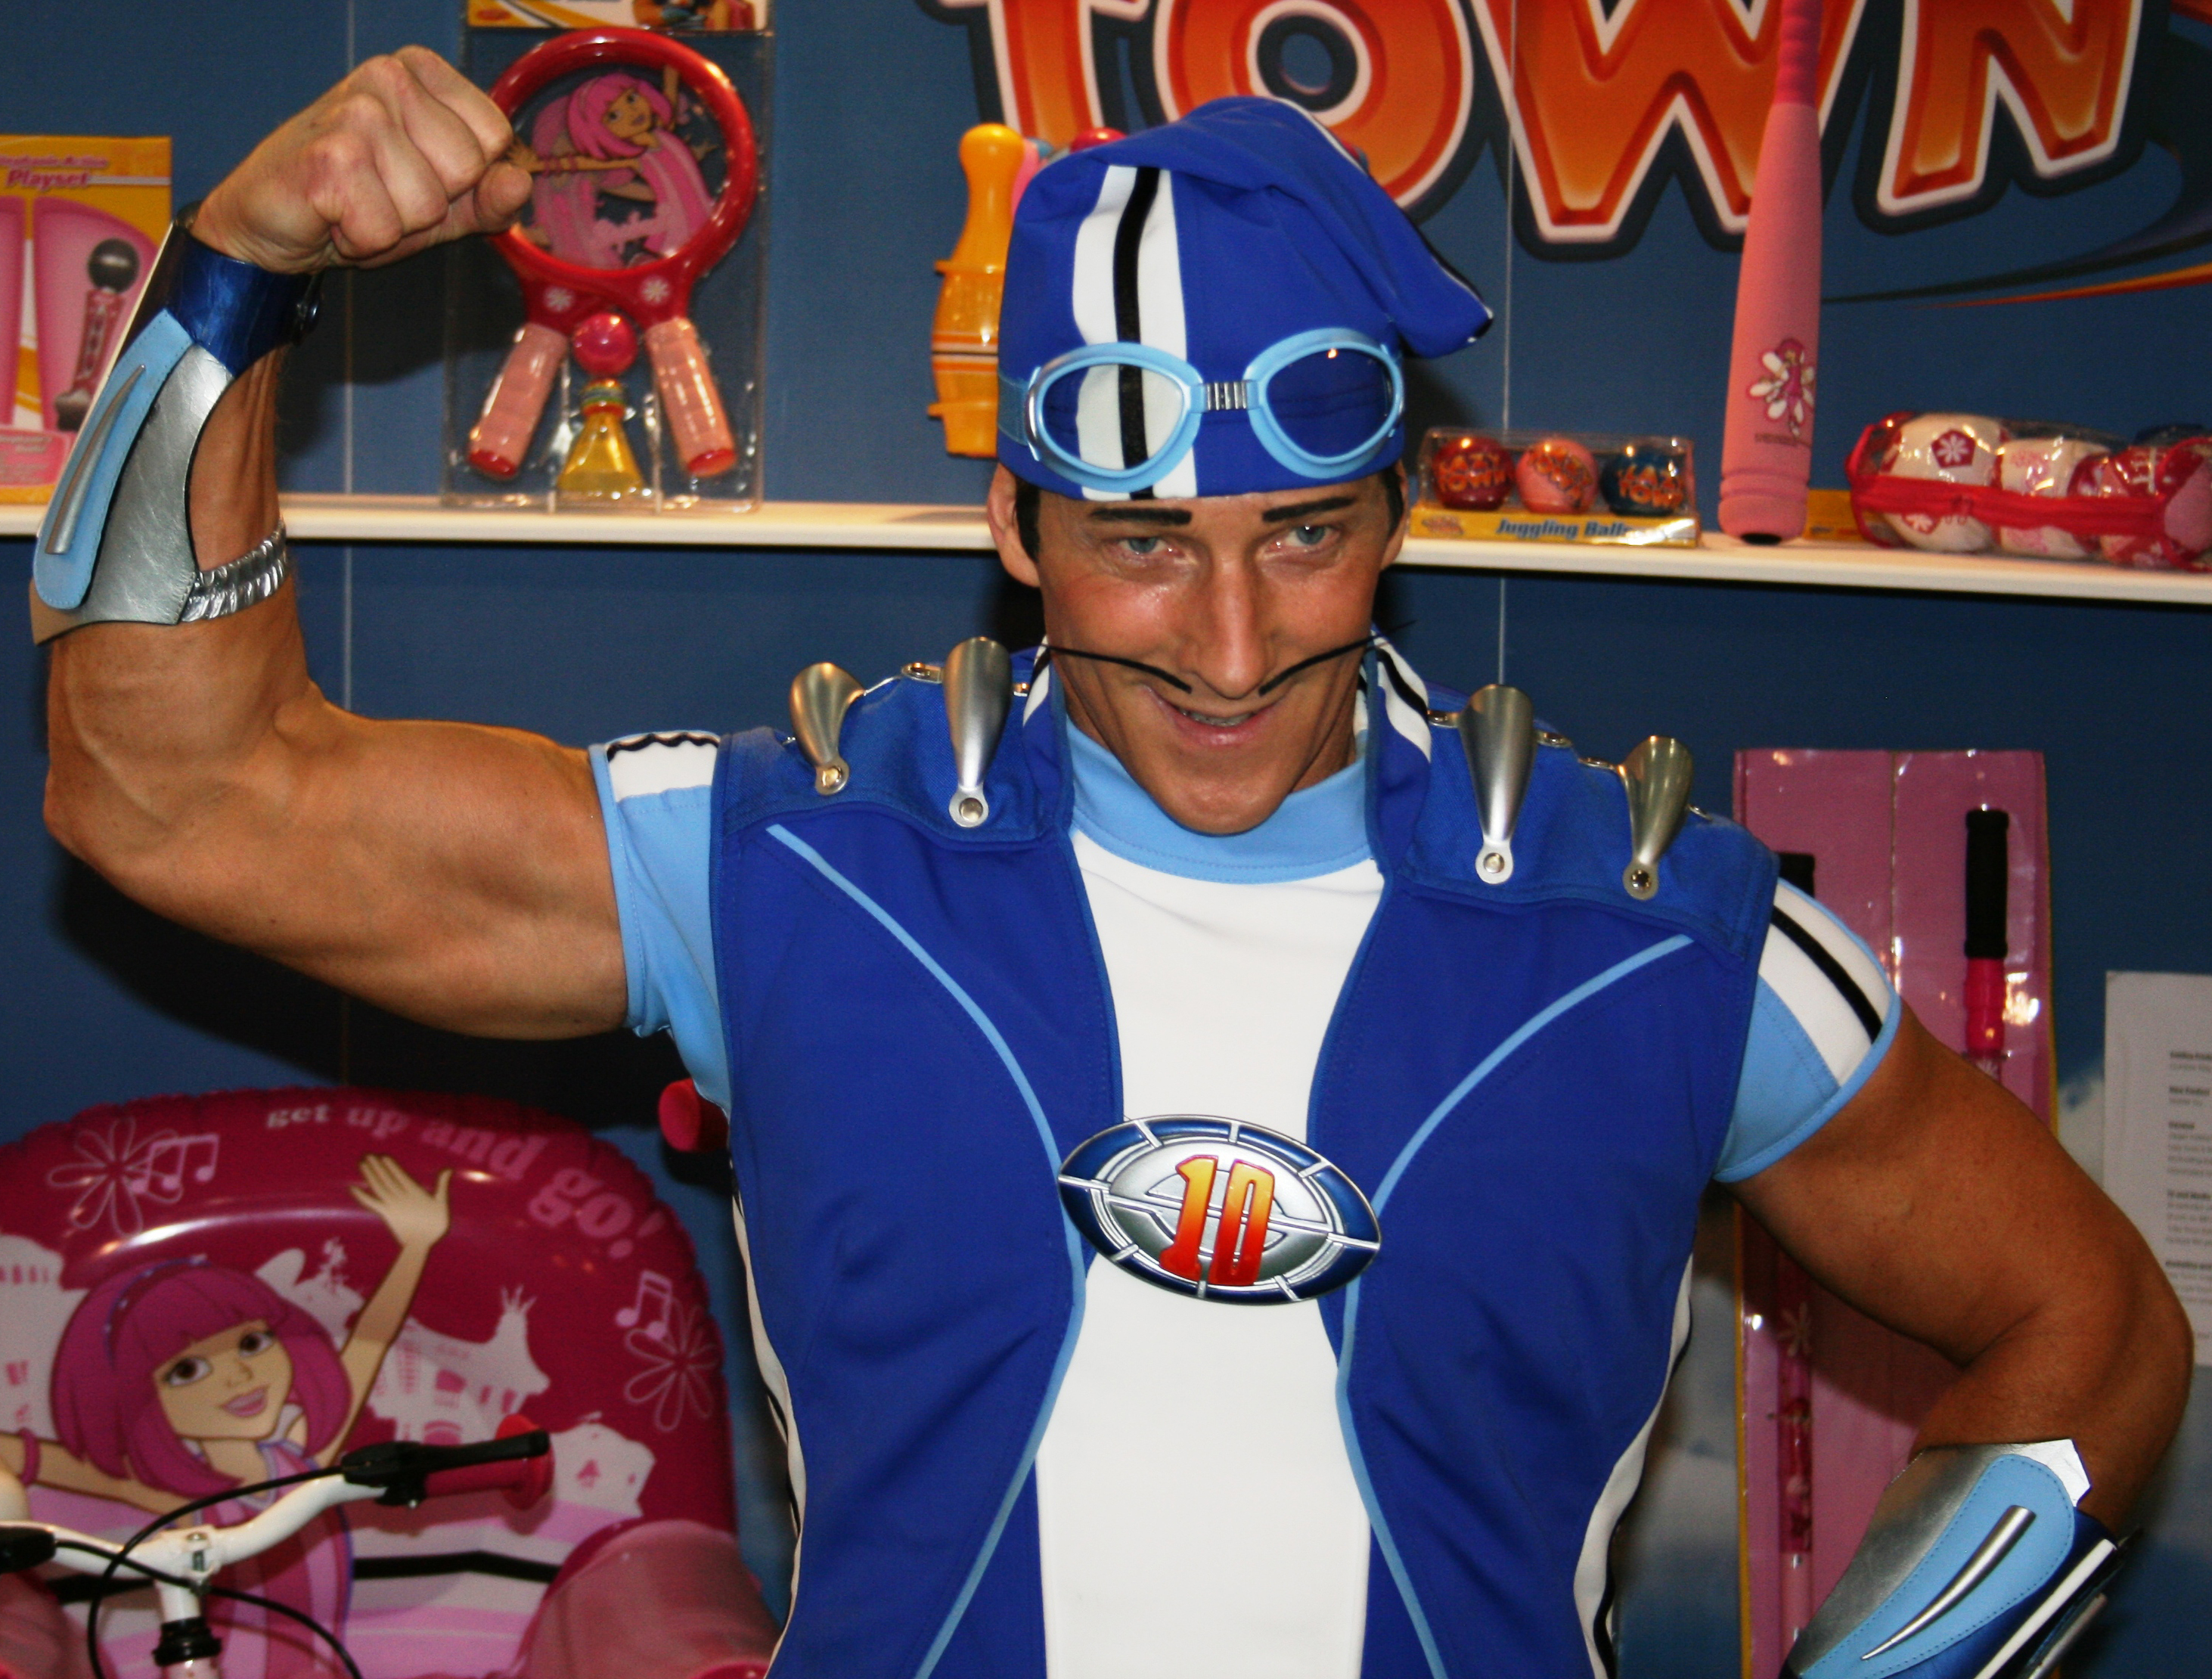 How old is sportacus from lazytown